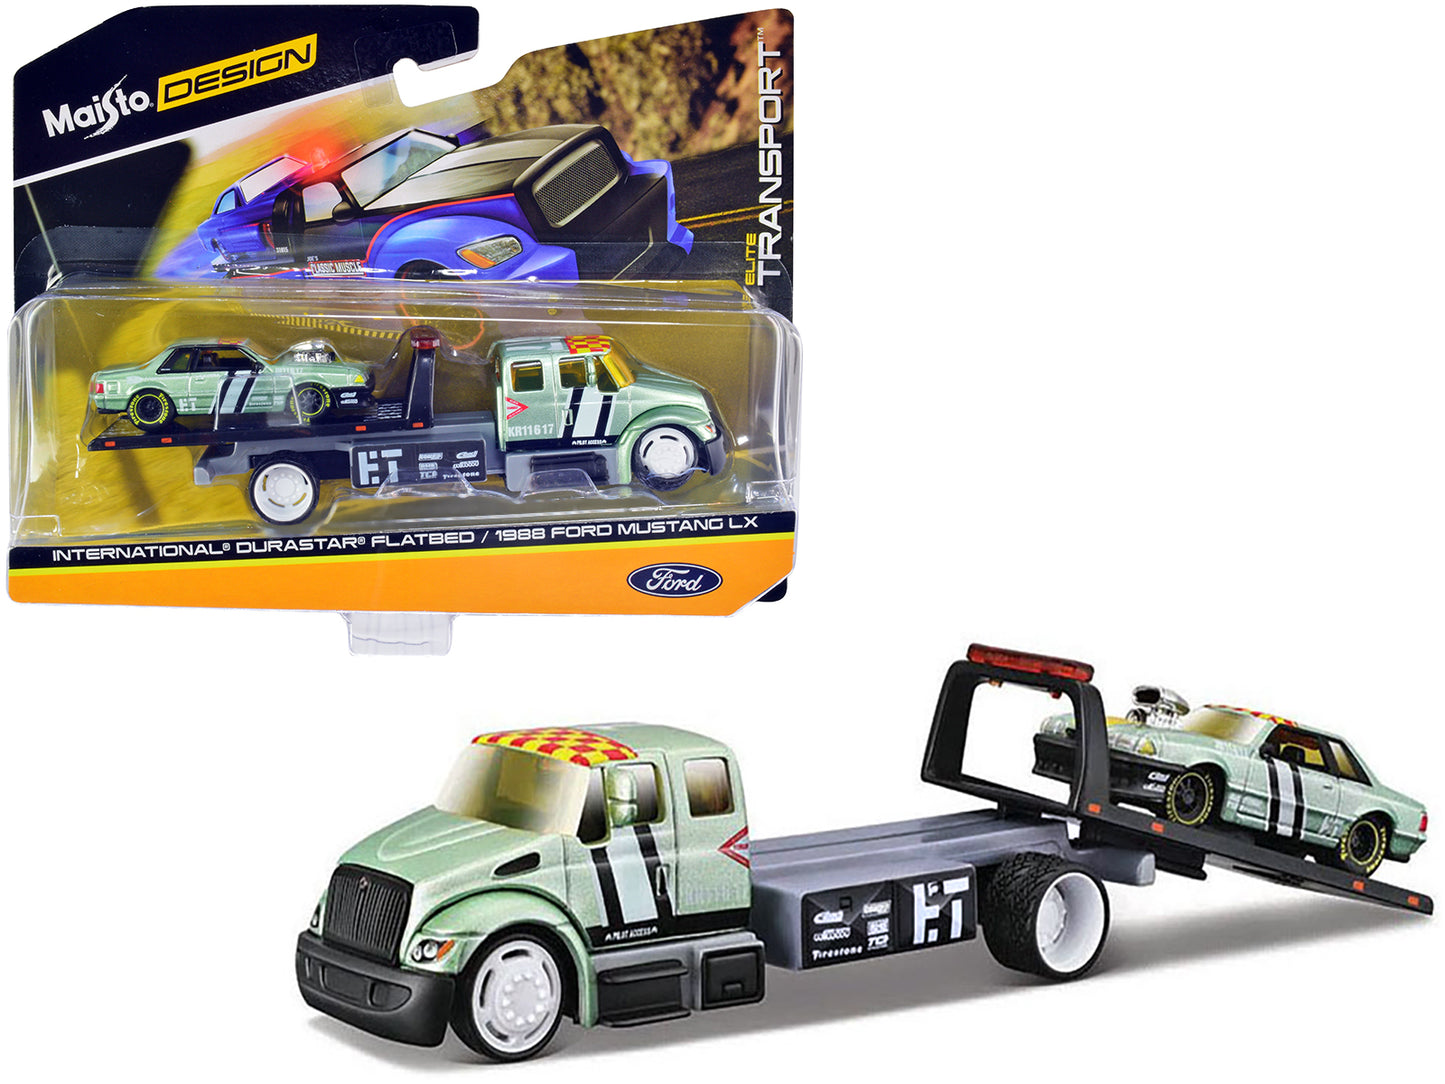 International DuraStar Flatbed Truck #17 and 1988 Ford Mustang LX #17 Light Green Metallic with Stripes and Graphics "Elite Transport" Series 1/64 Diecast Models by Maisto